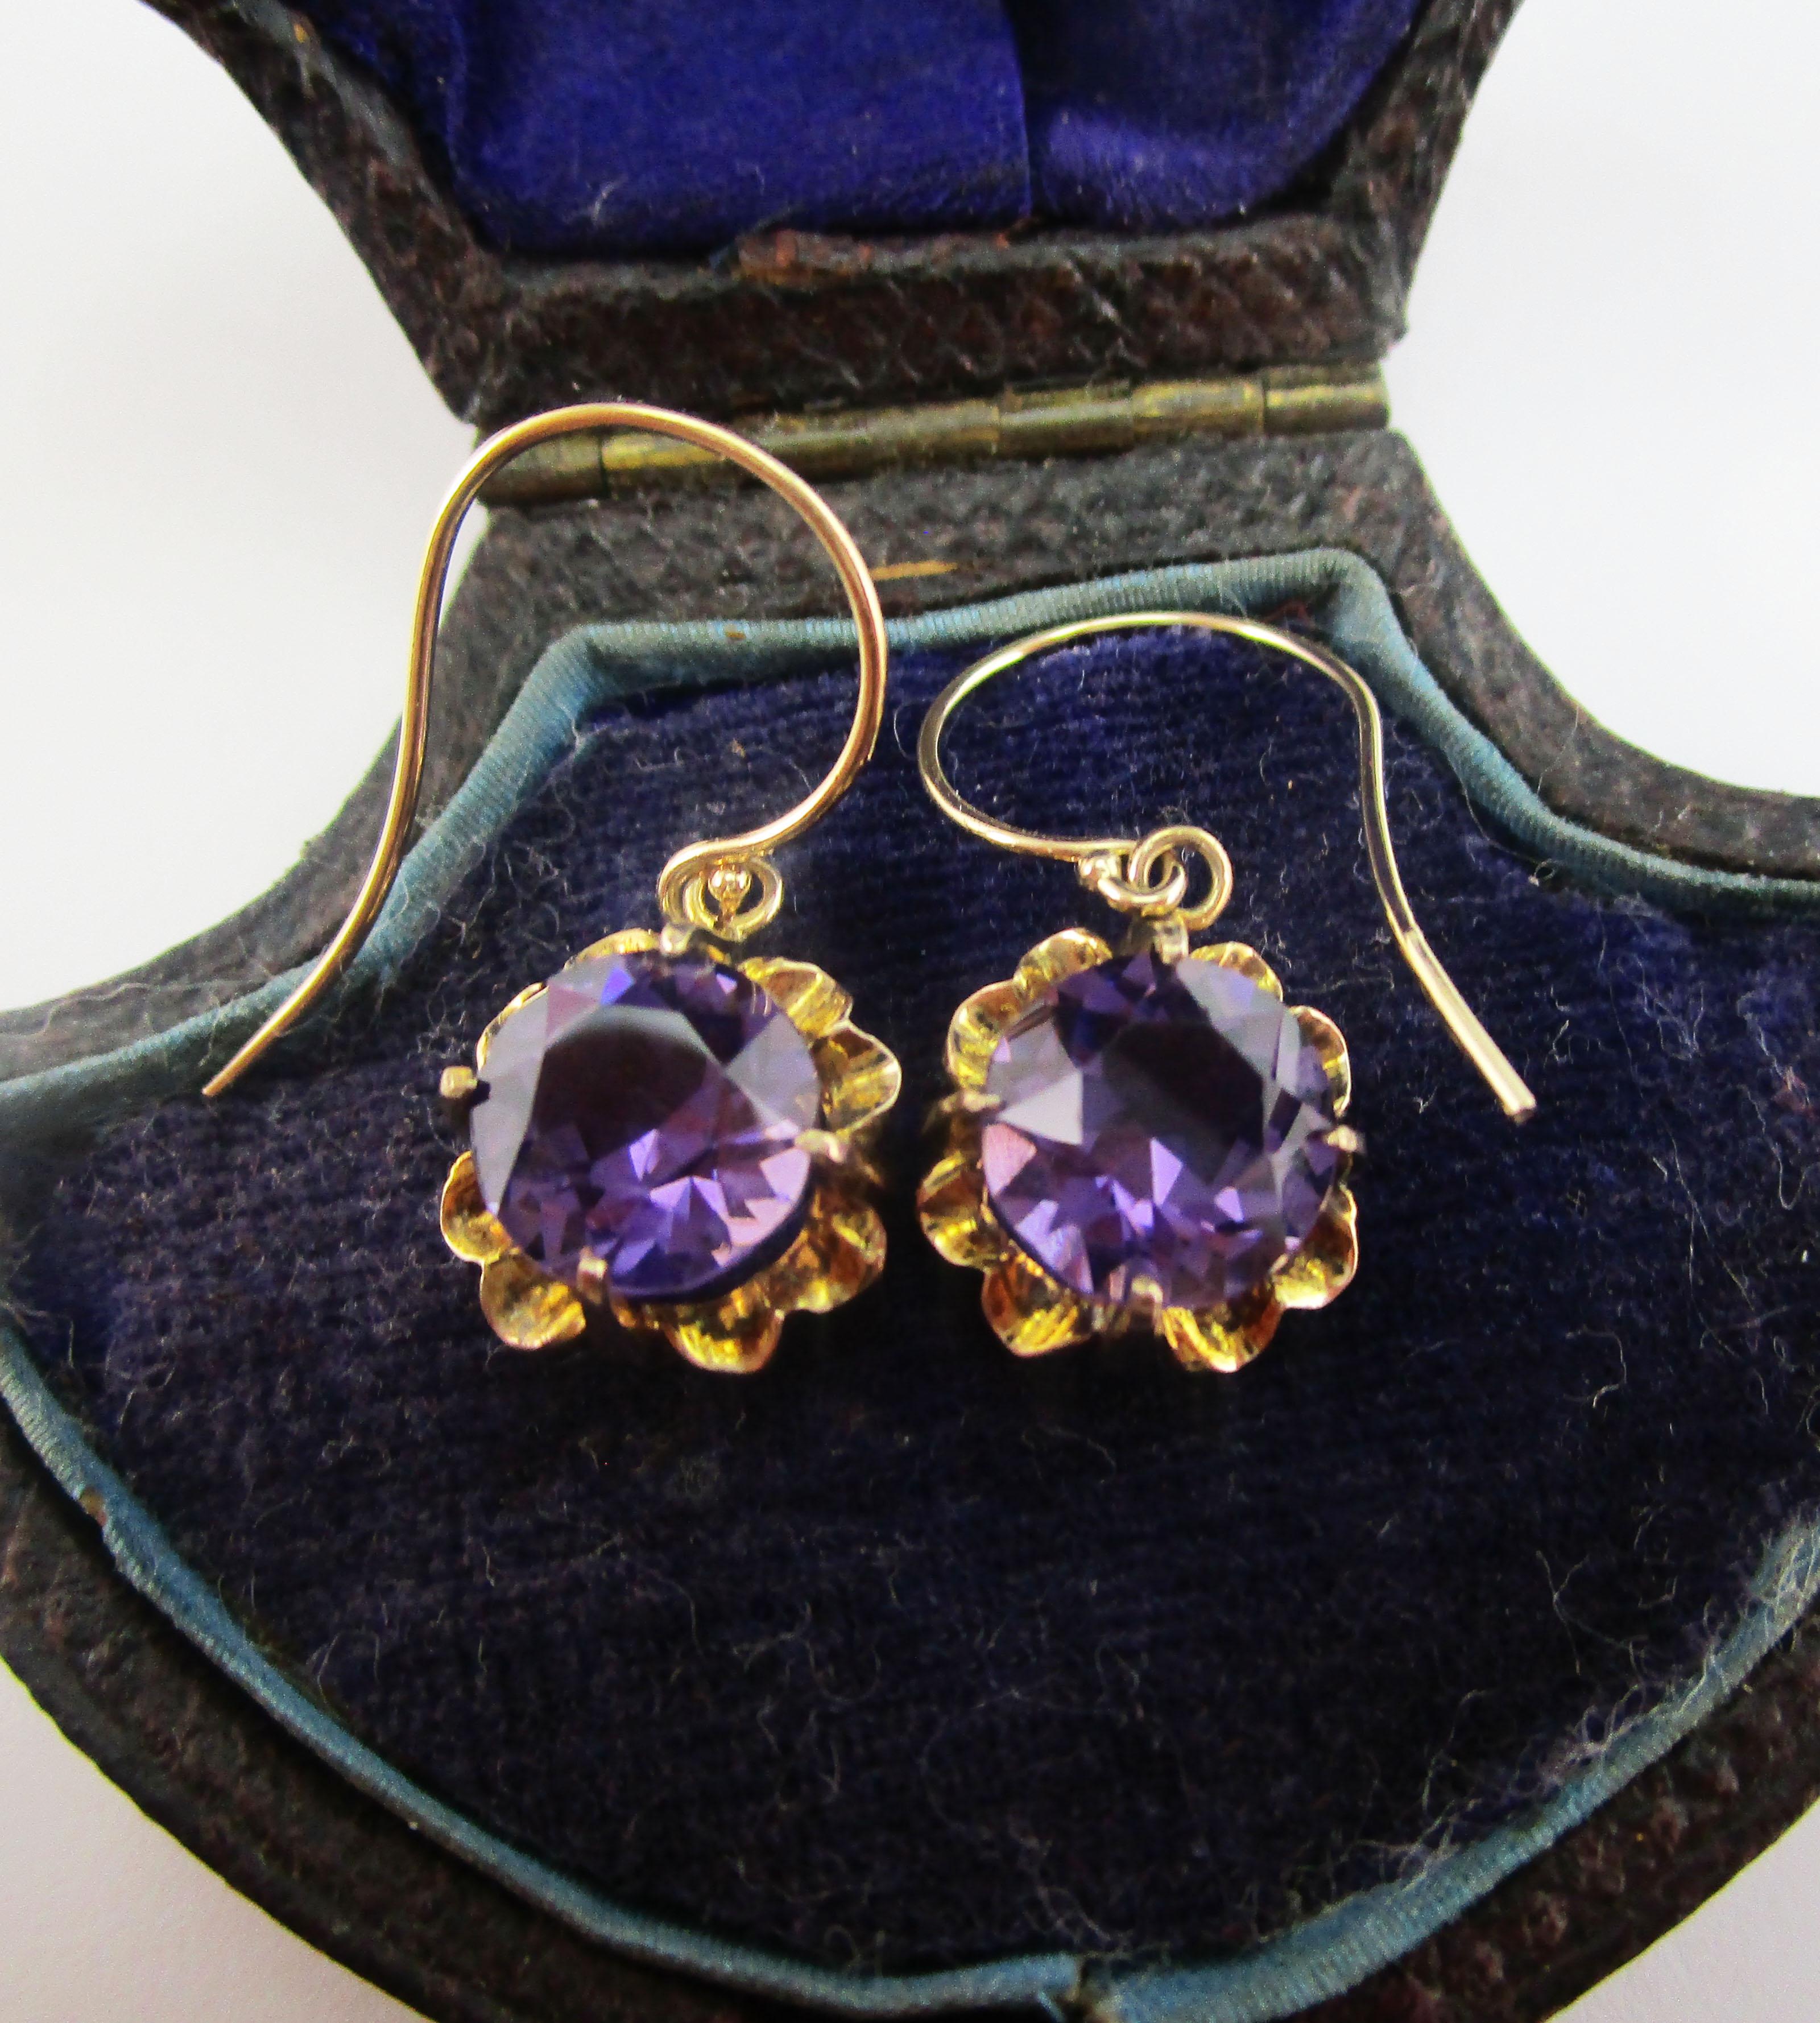 This is a gorgeous pair of Victorian dangle earrings in delicate rose gold with beautiful royal purple amethyst centers. The earrings have a unique four prong setting in an arching floral earring that is completely articulated. The complementary